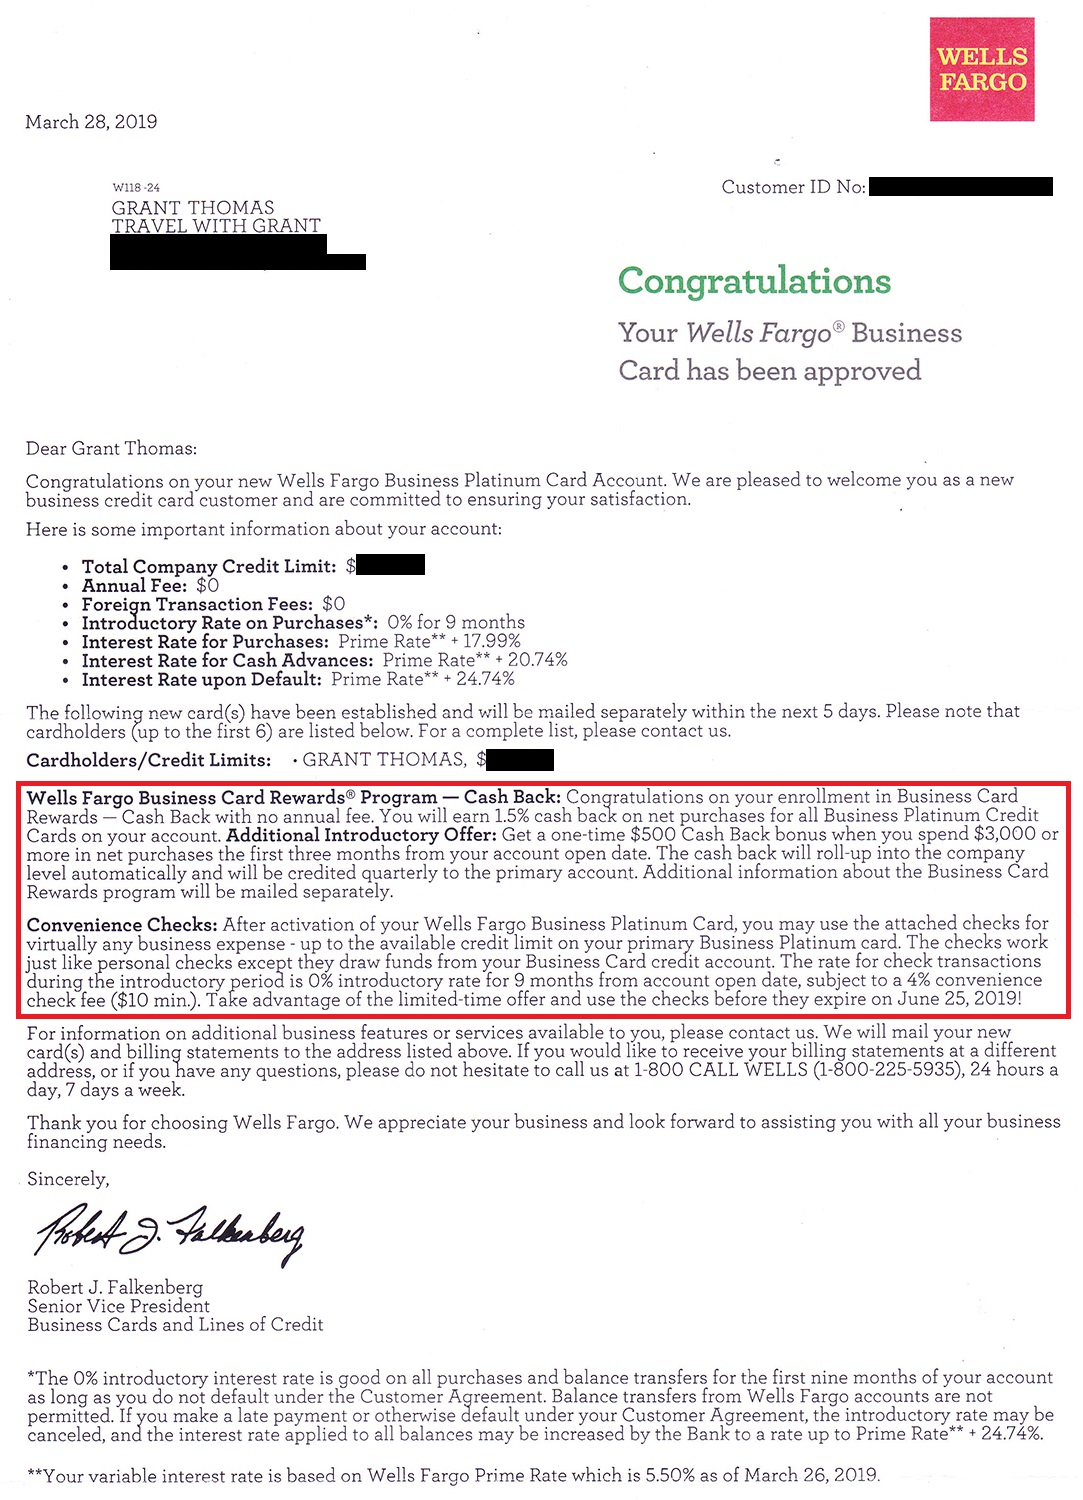 Wells Fargo Business Platinum Credit Card Approval Letter 1 | Travel with Grant